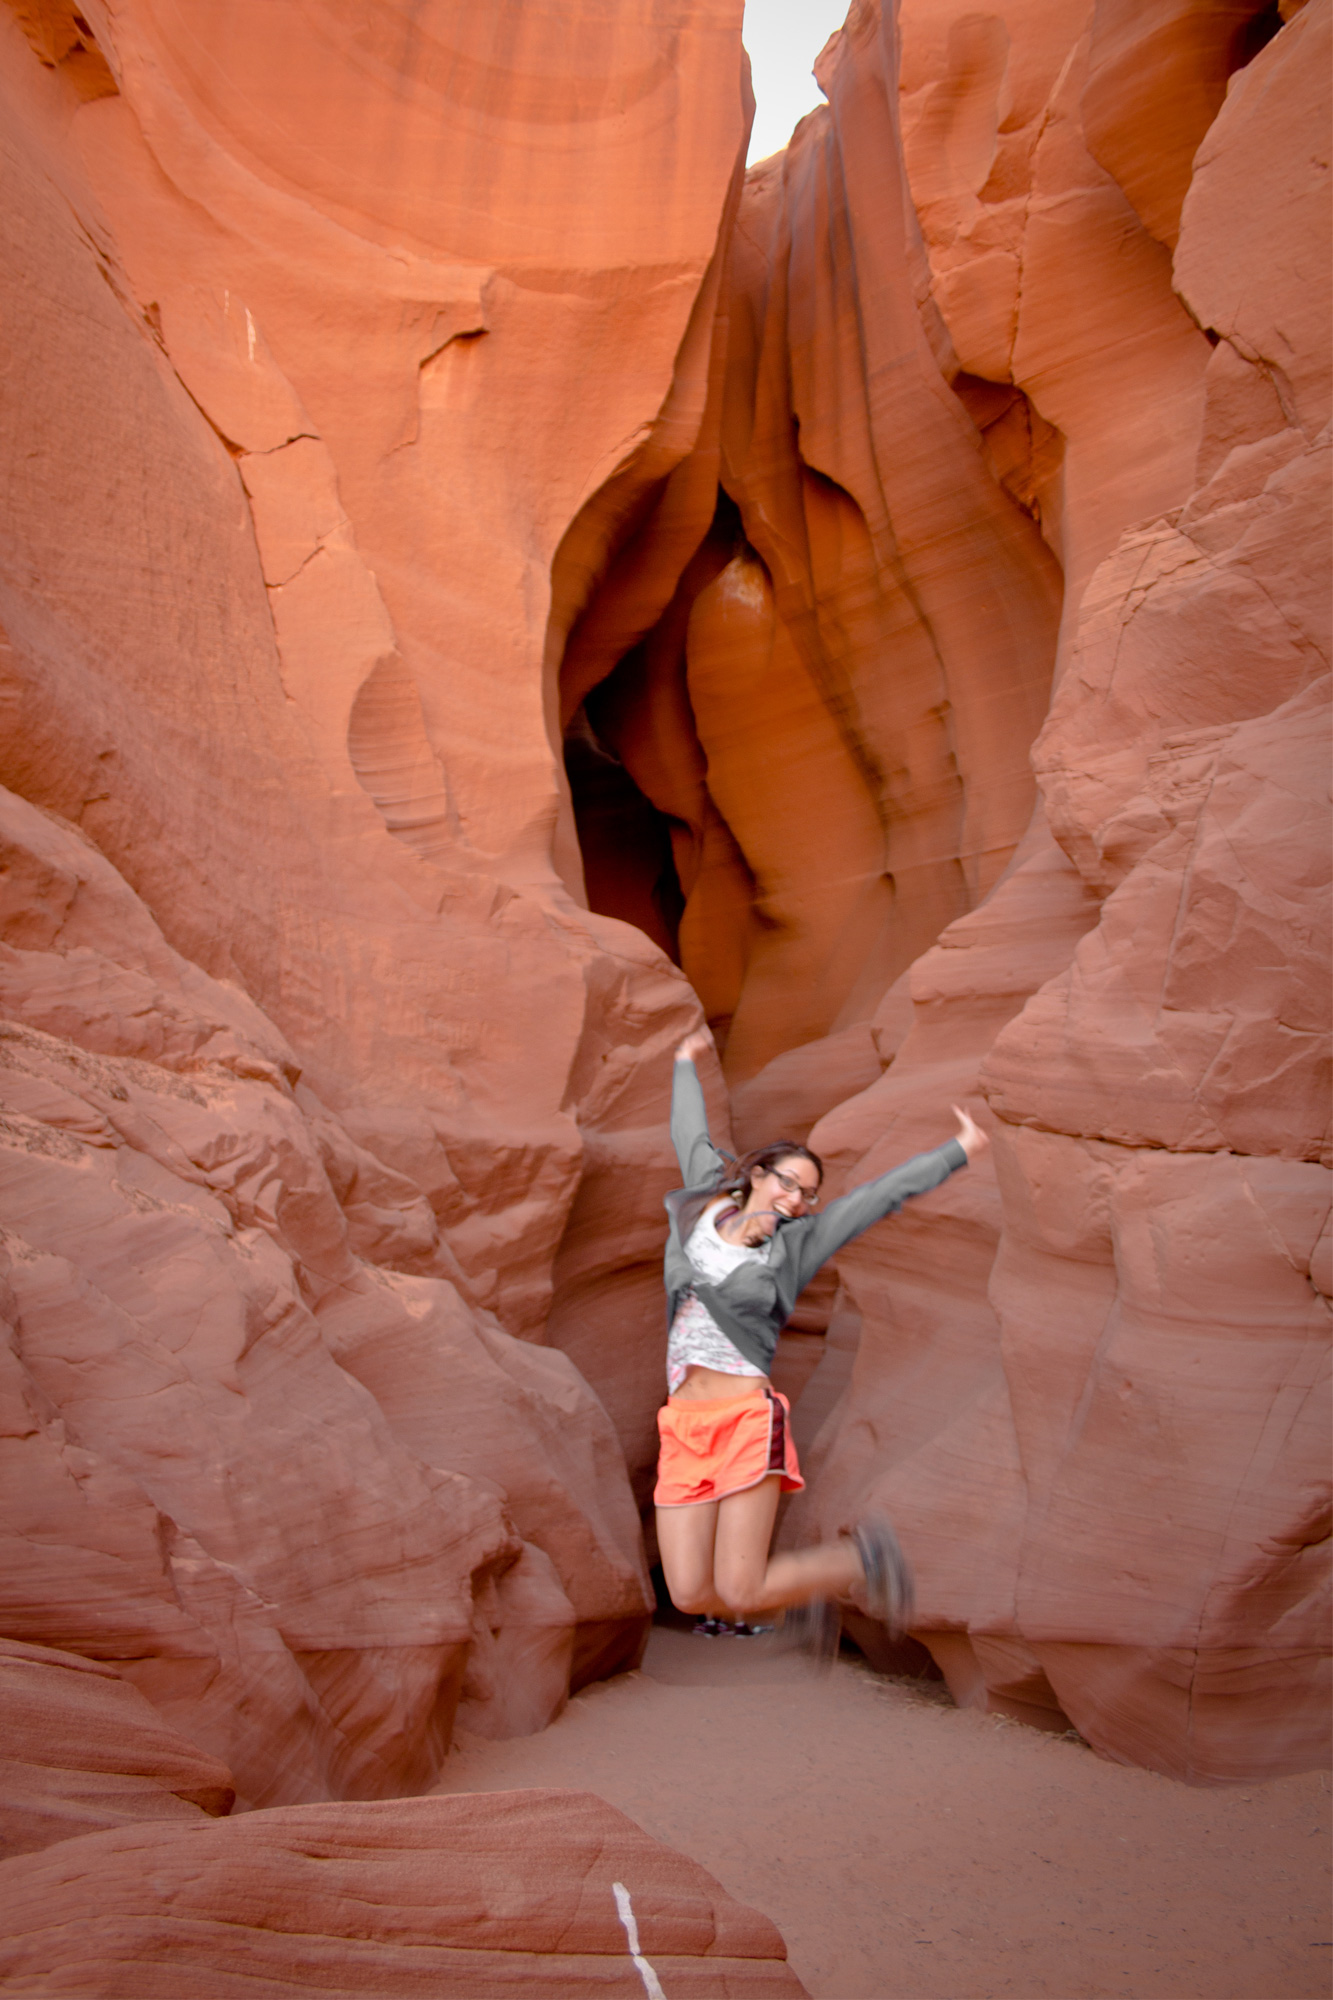 End of Antelope Canyon